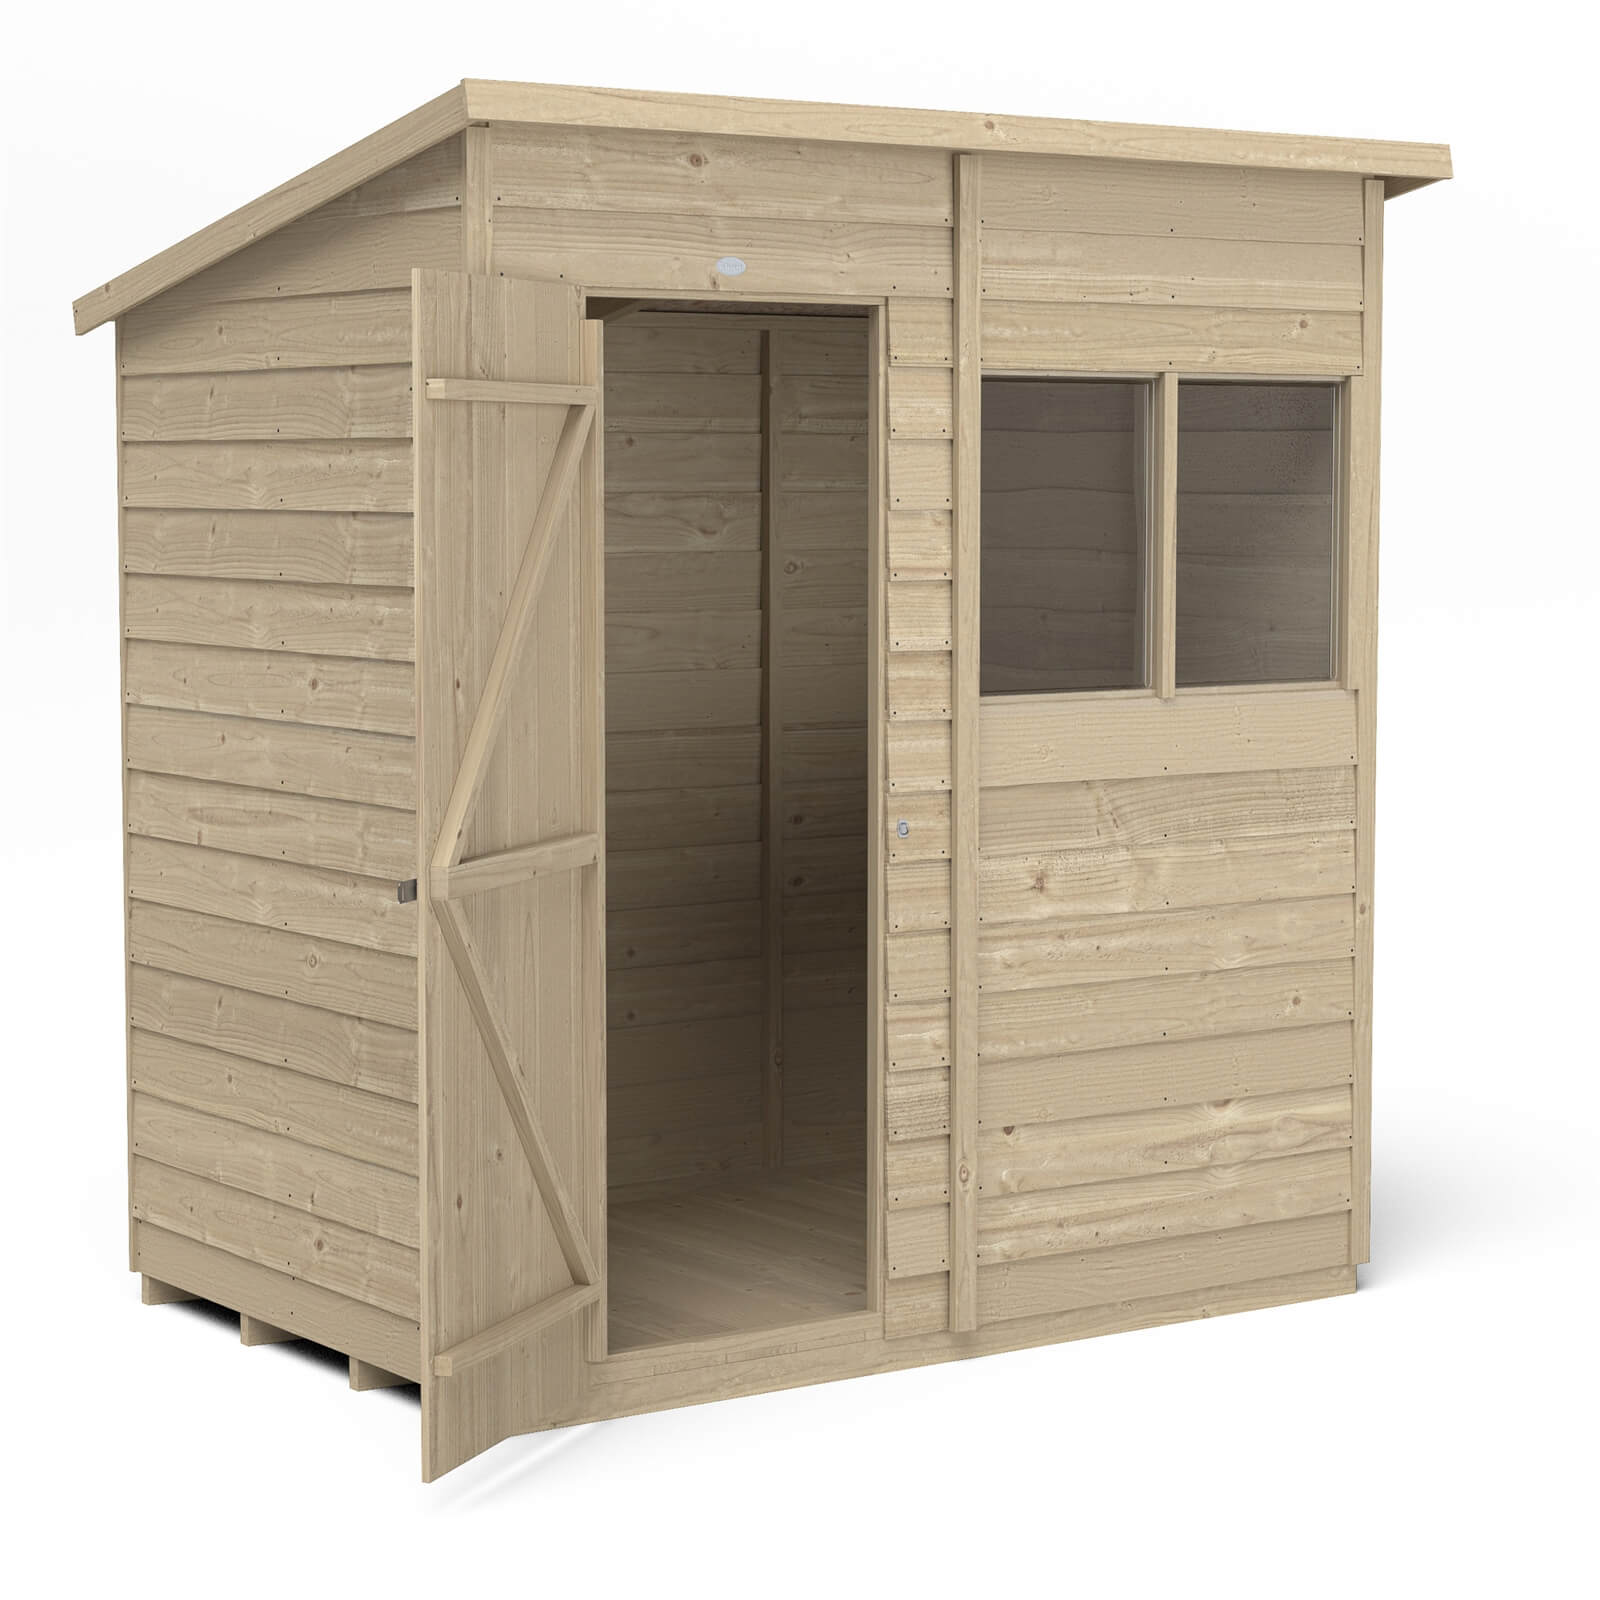 Forest 6 x 4ft Overlap Pressure Treated Pent Shed